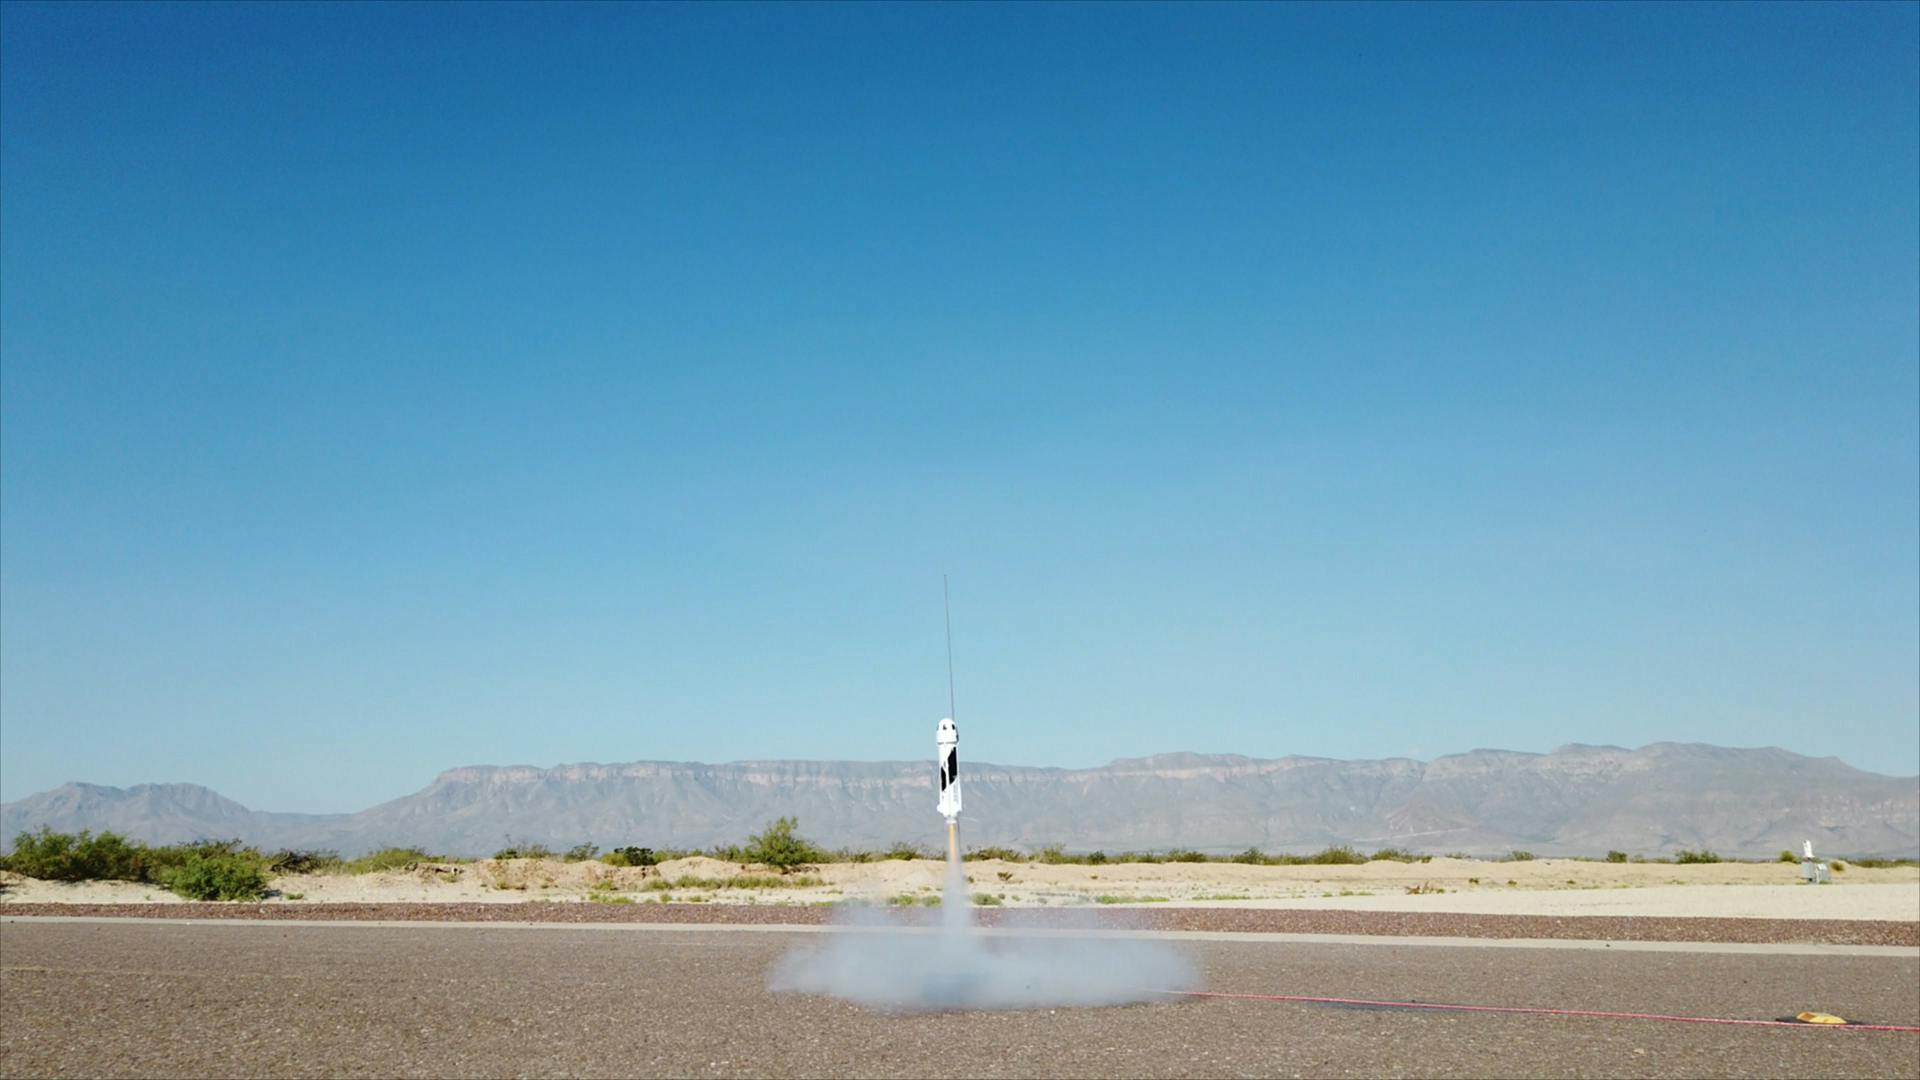 A small model rocket takes off from the ground in the Texas desert